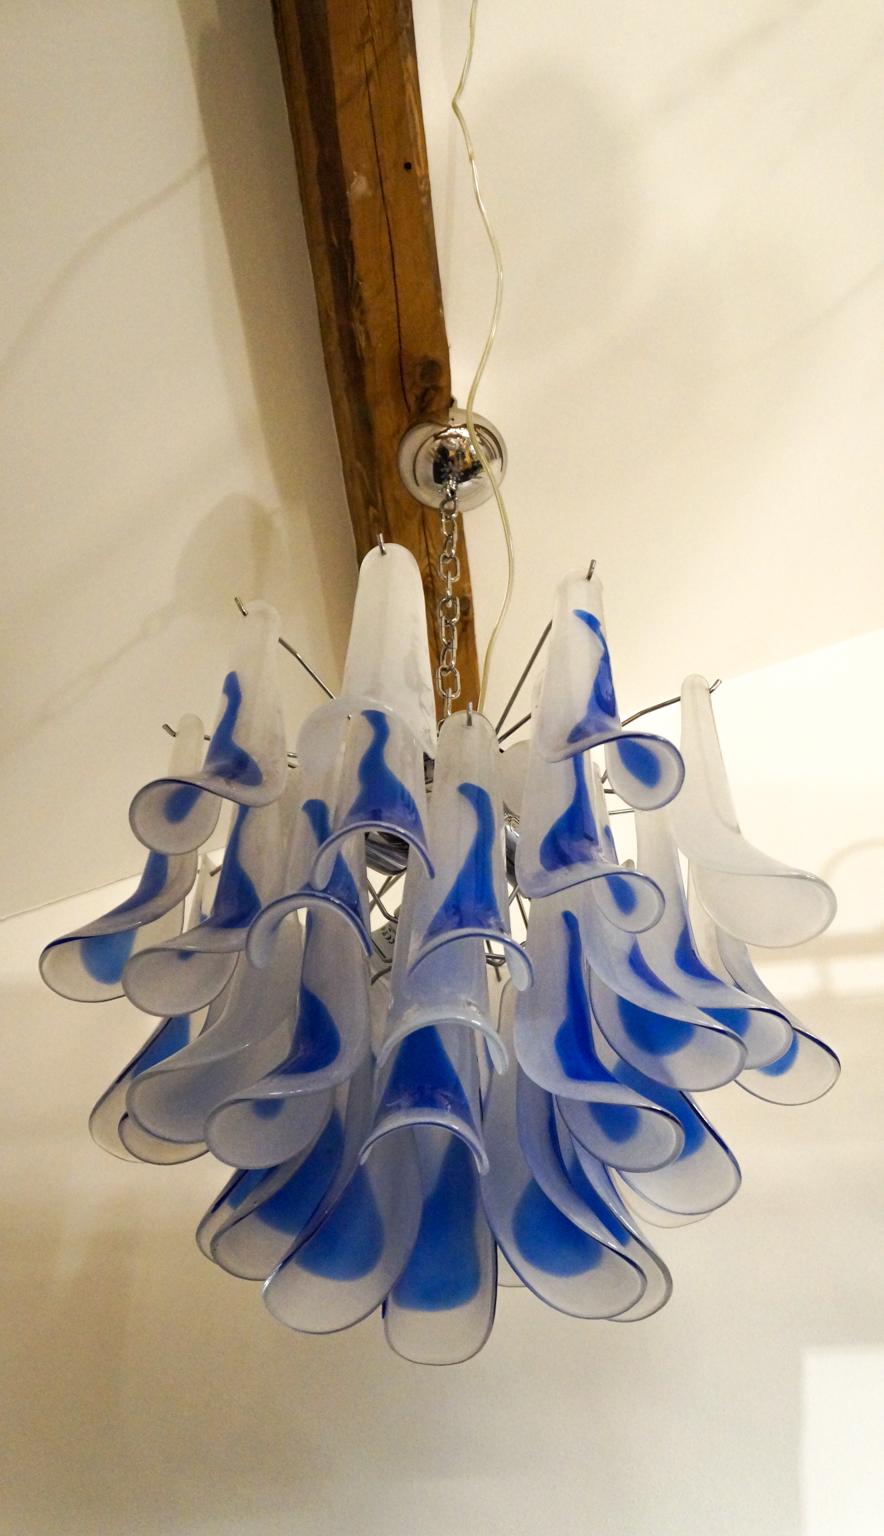 Alberto Donà Mid-Century Modern Crystal Blue Murano Glass Selle Chandelier, 1992 For Sale 8